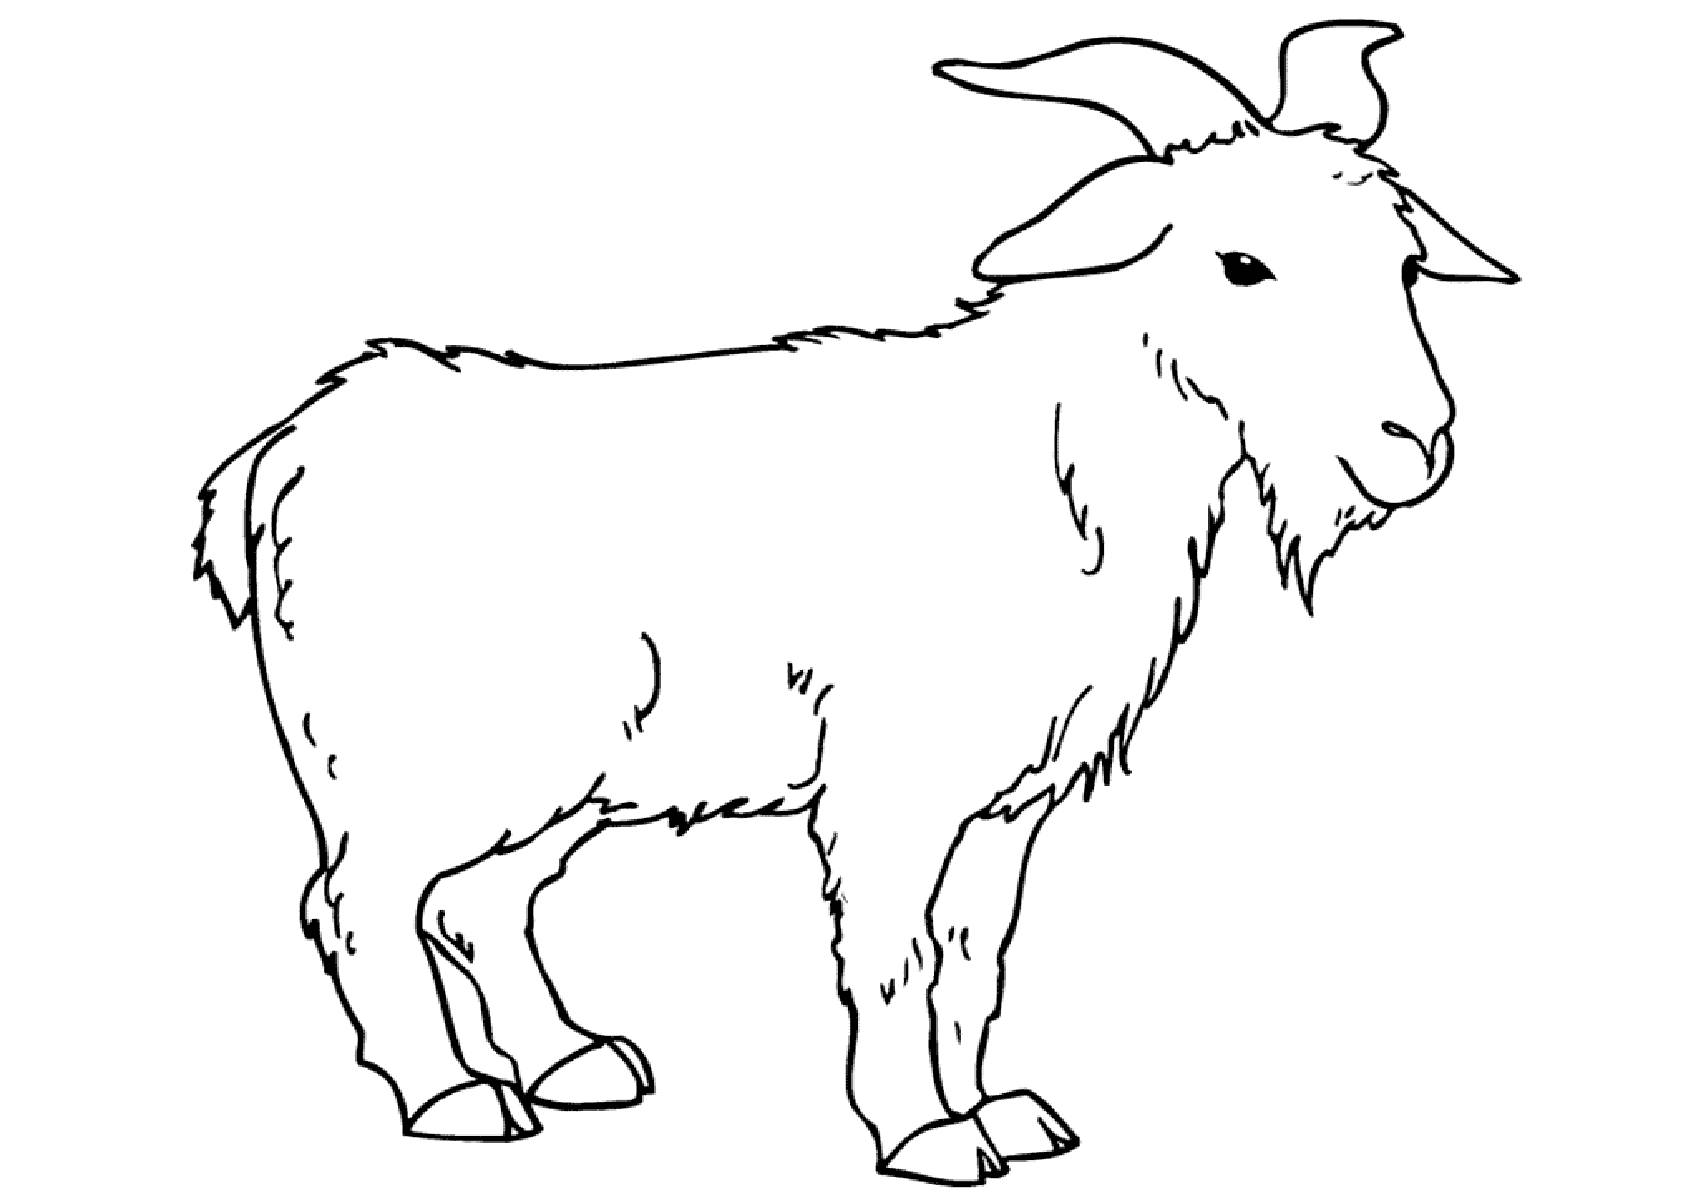 Goat with branched horns